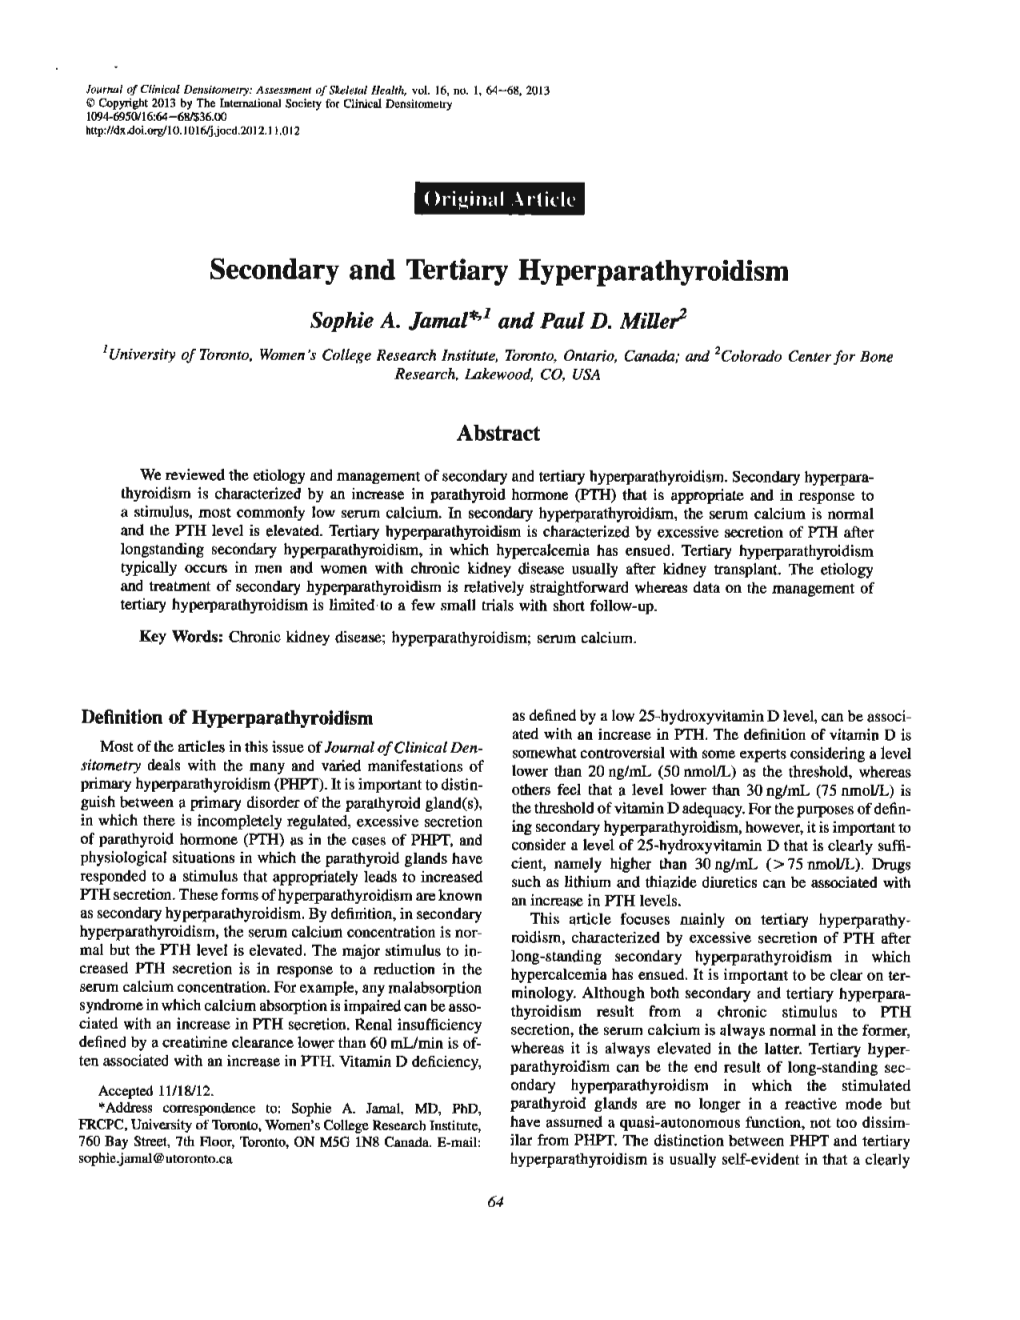 Secondary and Tertiary Hyperparathyroidism Sophie A